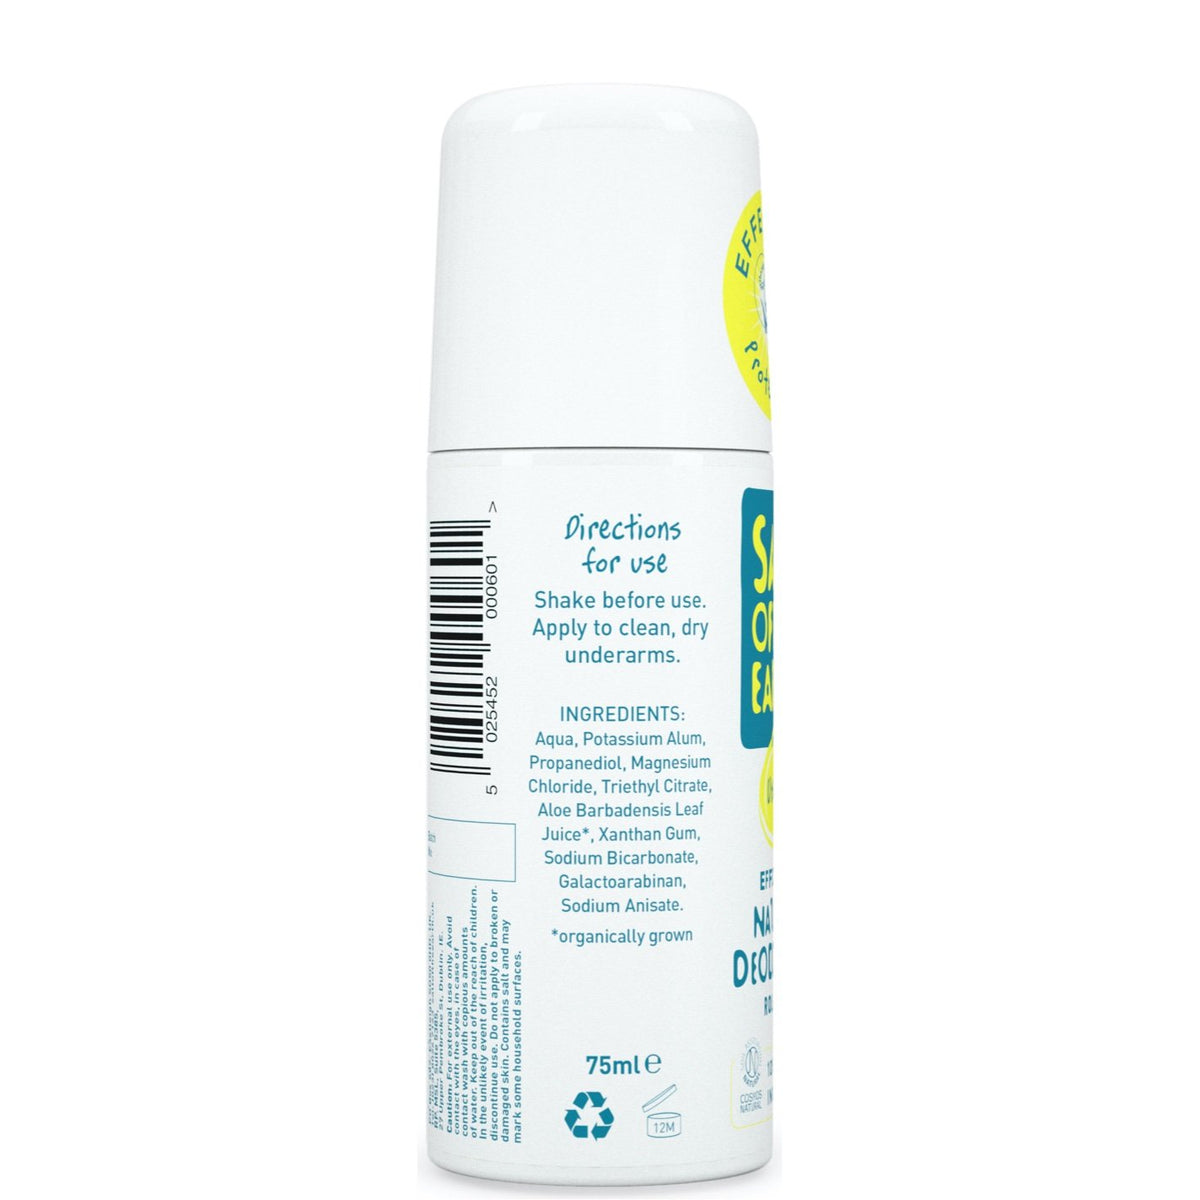 Unscented Roll-On Deodorant Salt of the Earth Left Side of Pack